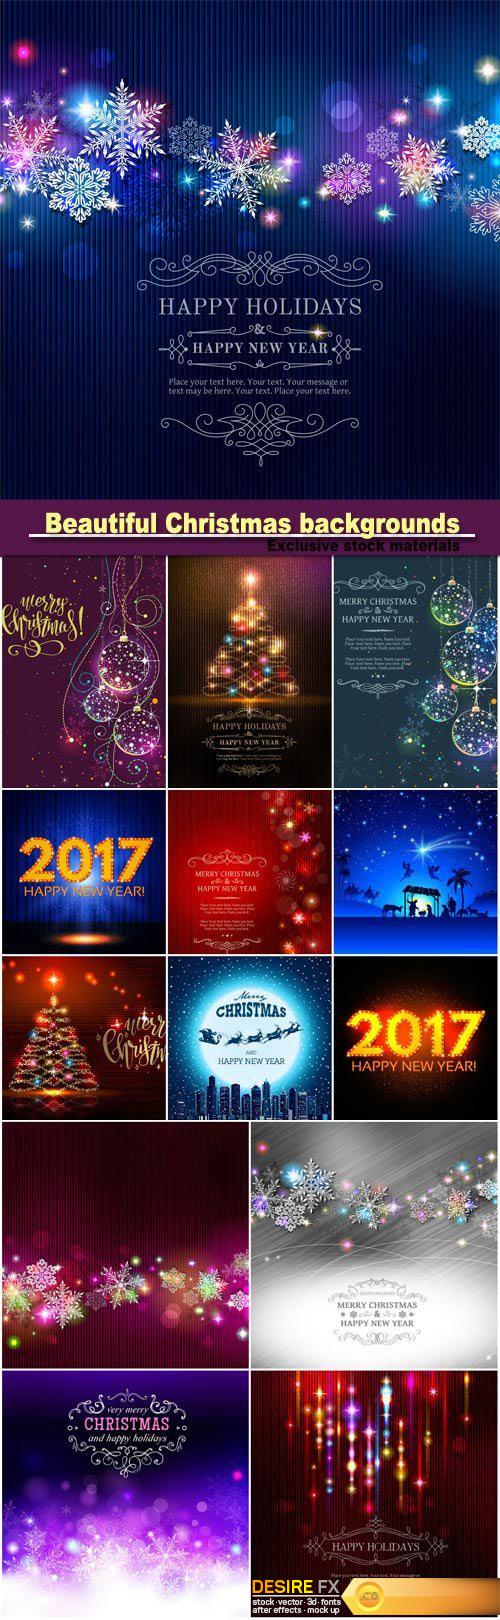 Christmas backgrounds, sparkling elements, snowflakes